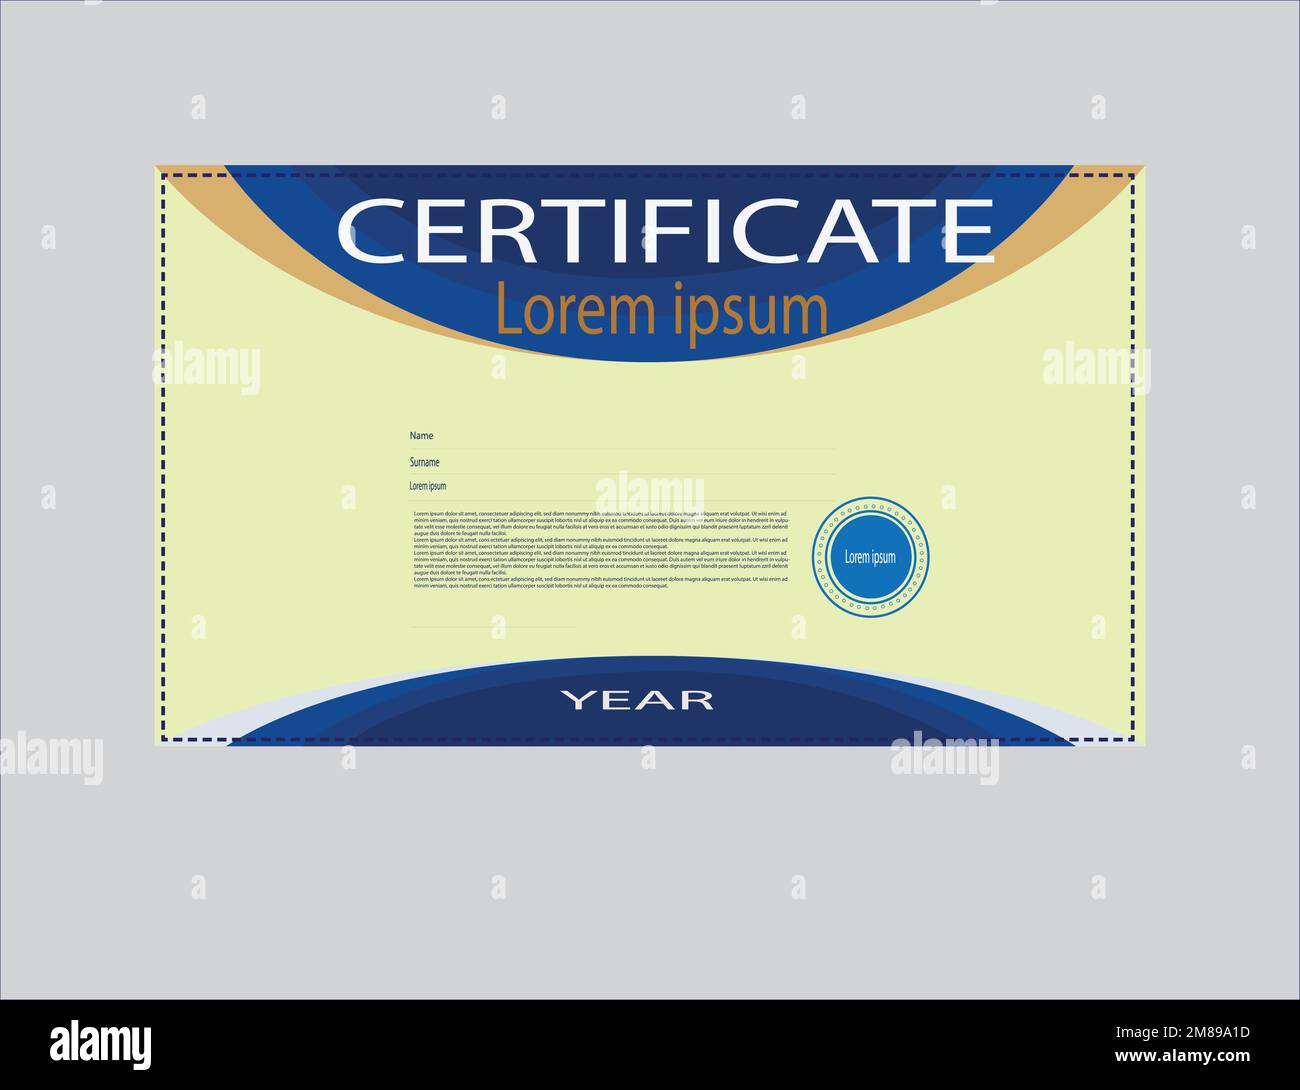 Stock certificate Vectors & Illustrations for Free Download